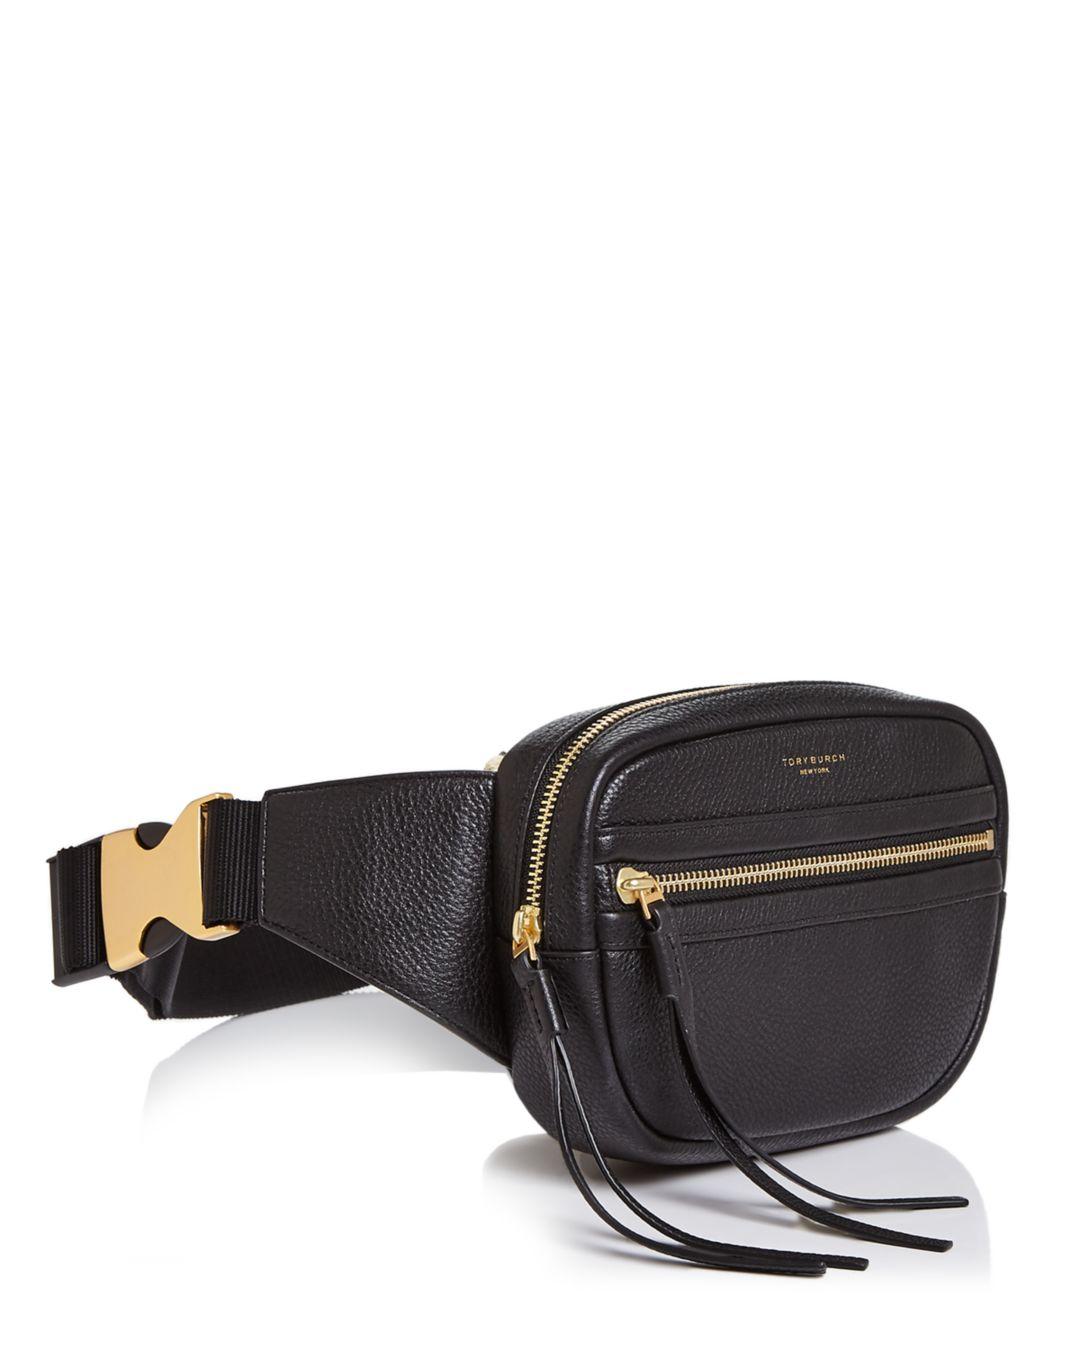 Tory Burch Perry Leather Belt Bag in Black/Gold (Black) | Lyst